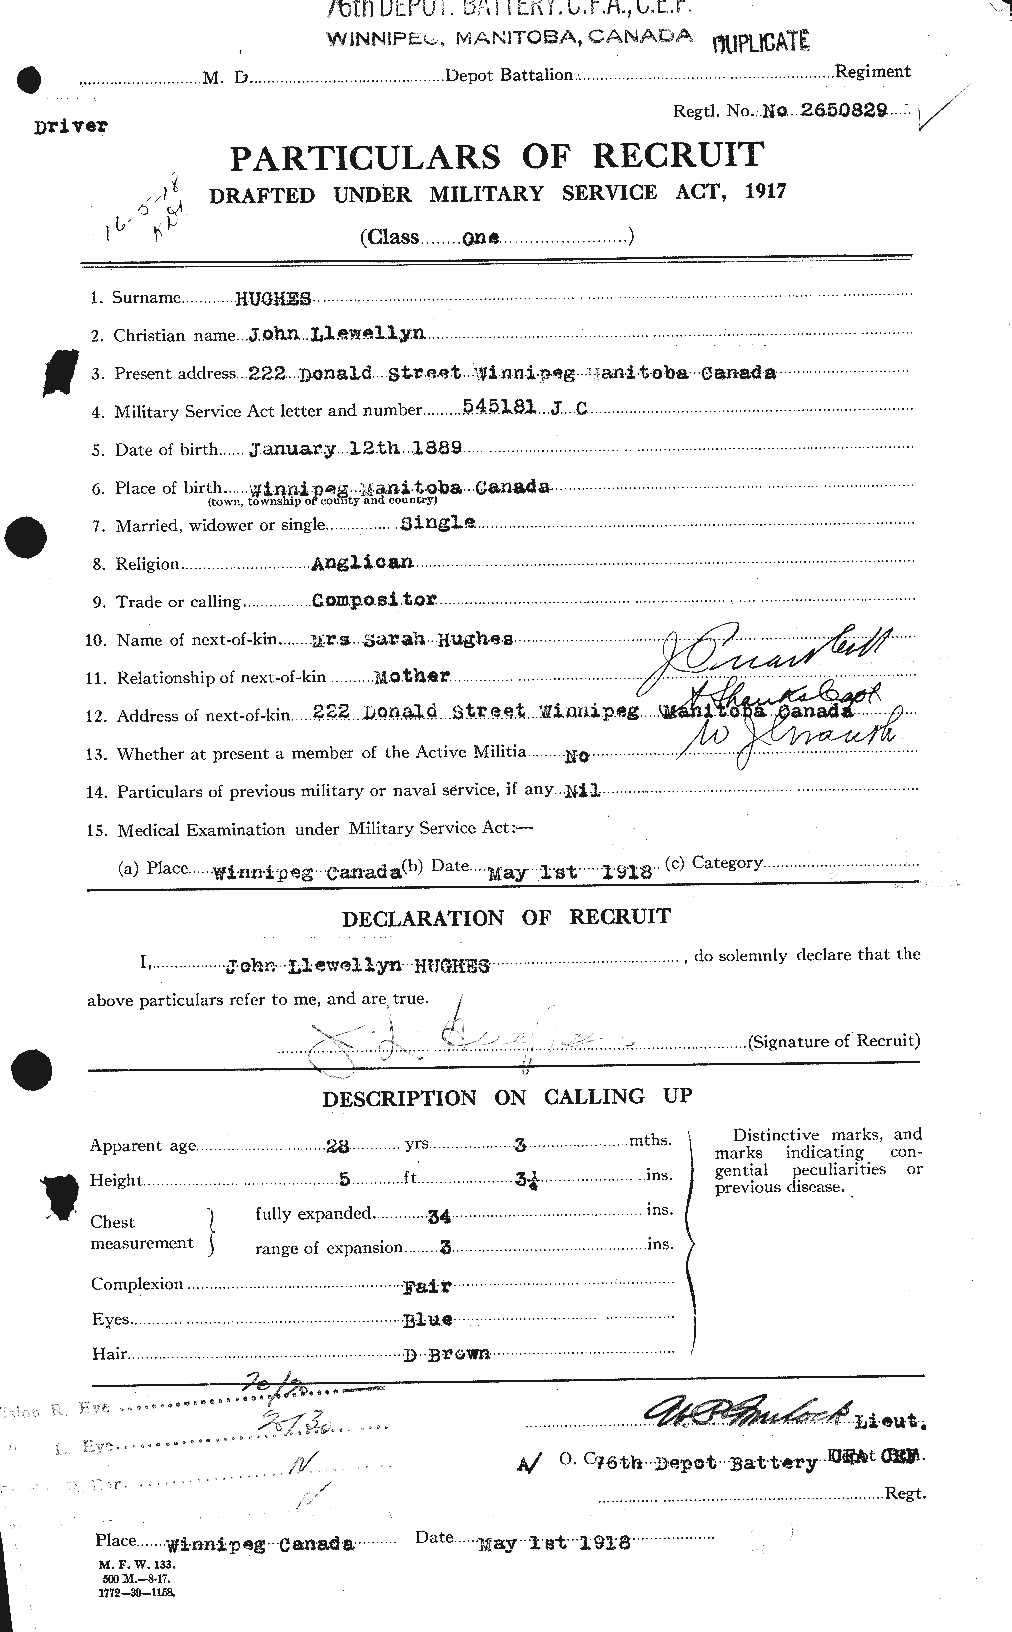 Personnel Records of the First World War - CEF 404041a